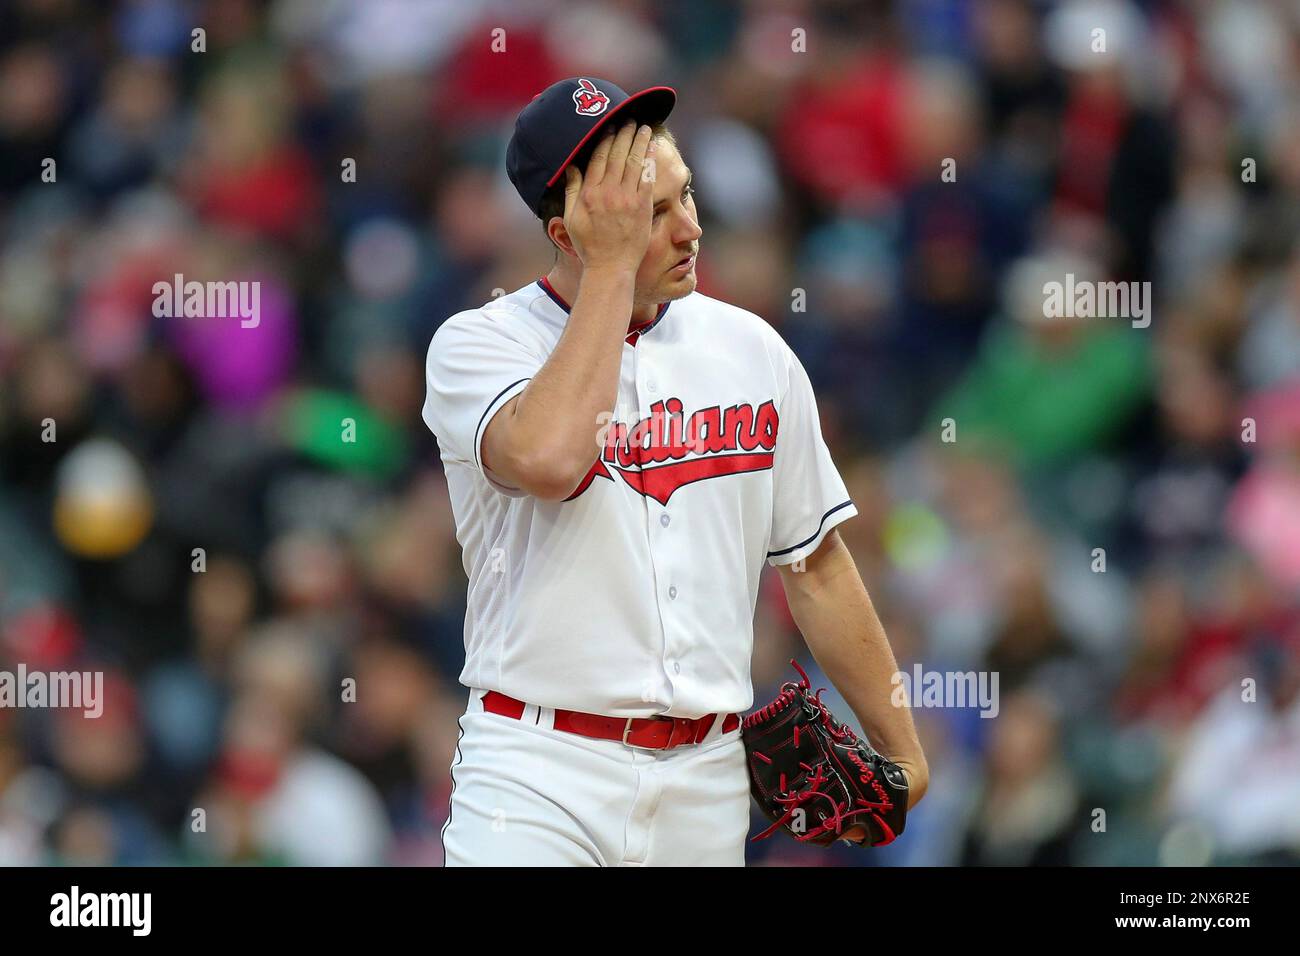 CLEVELAND, OH - MAY 11: Cleveland Indians Pitching Coach Carl Willis (51)  reacts after meets with Cleveland Indians starting pitcher issuing a walk  with the bases loaded to force in a run